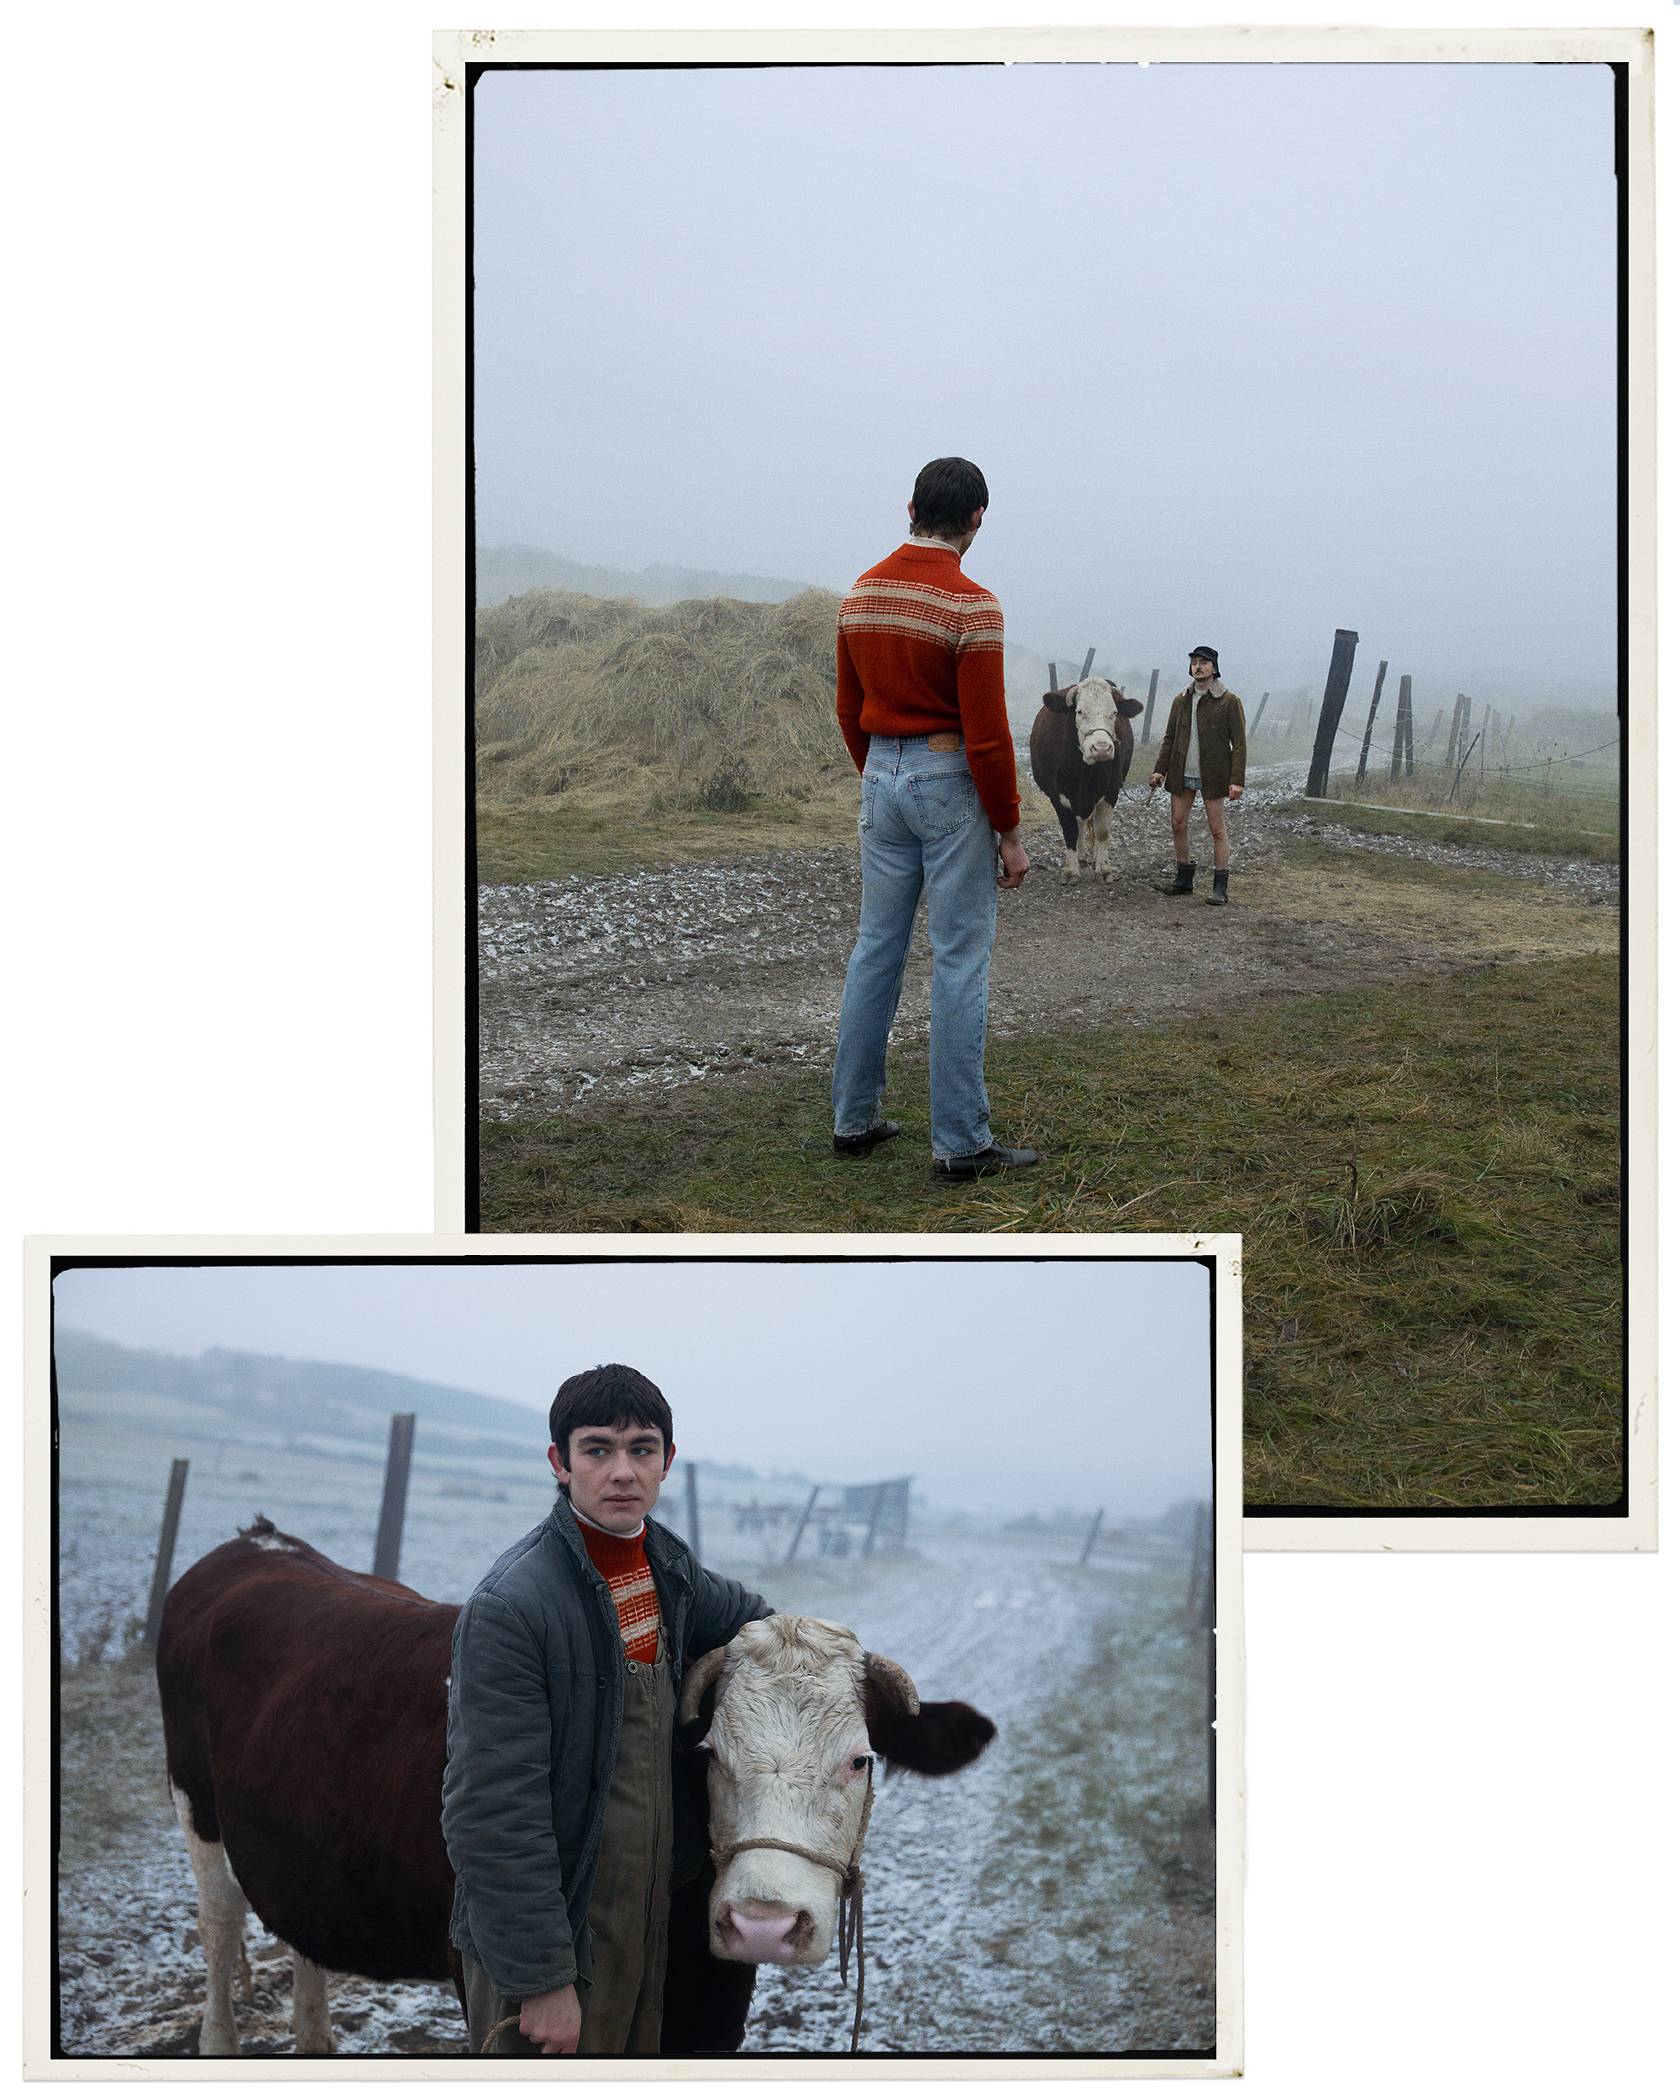 Collage of pictures showing a person wearing Levi's jeans outside with a cow.